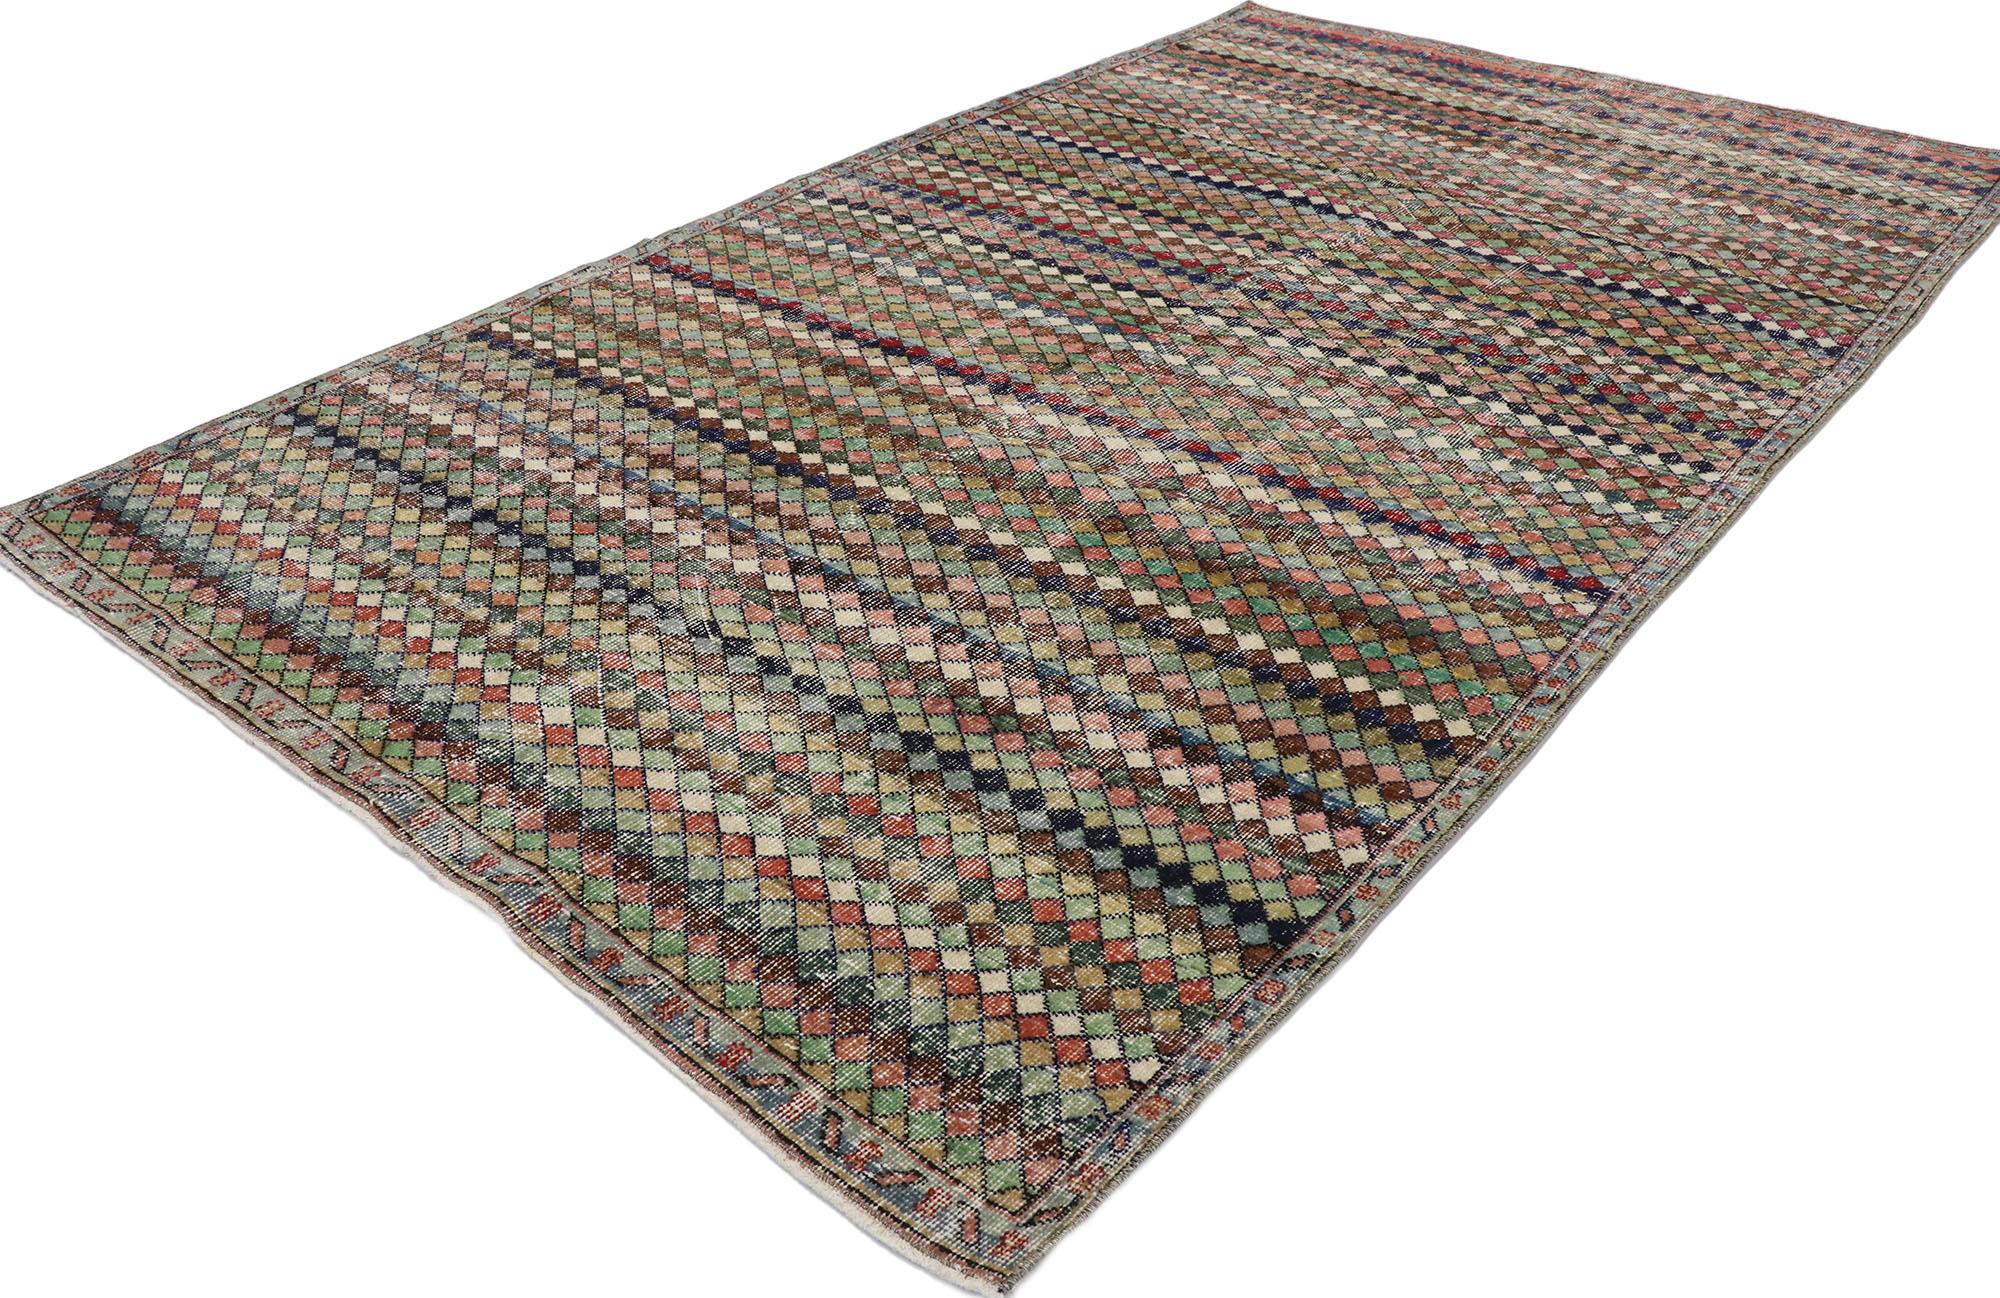 53289, distressed vintage Turkish Sivas rug with Mid-Century Modern Bohemian style. This hand knotted wool distressed vintage Turkish Sivas rug features an all-over checkered pattern comprised of rows of multicolored diamonds. Each row alternates